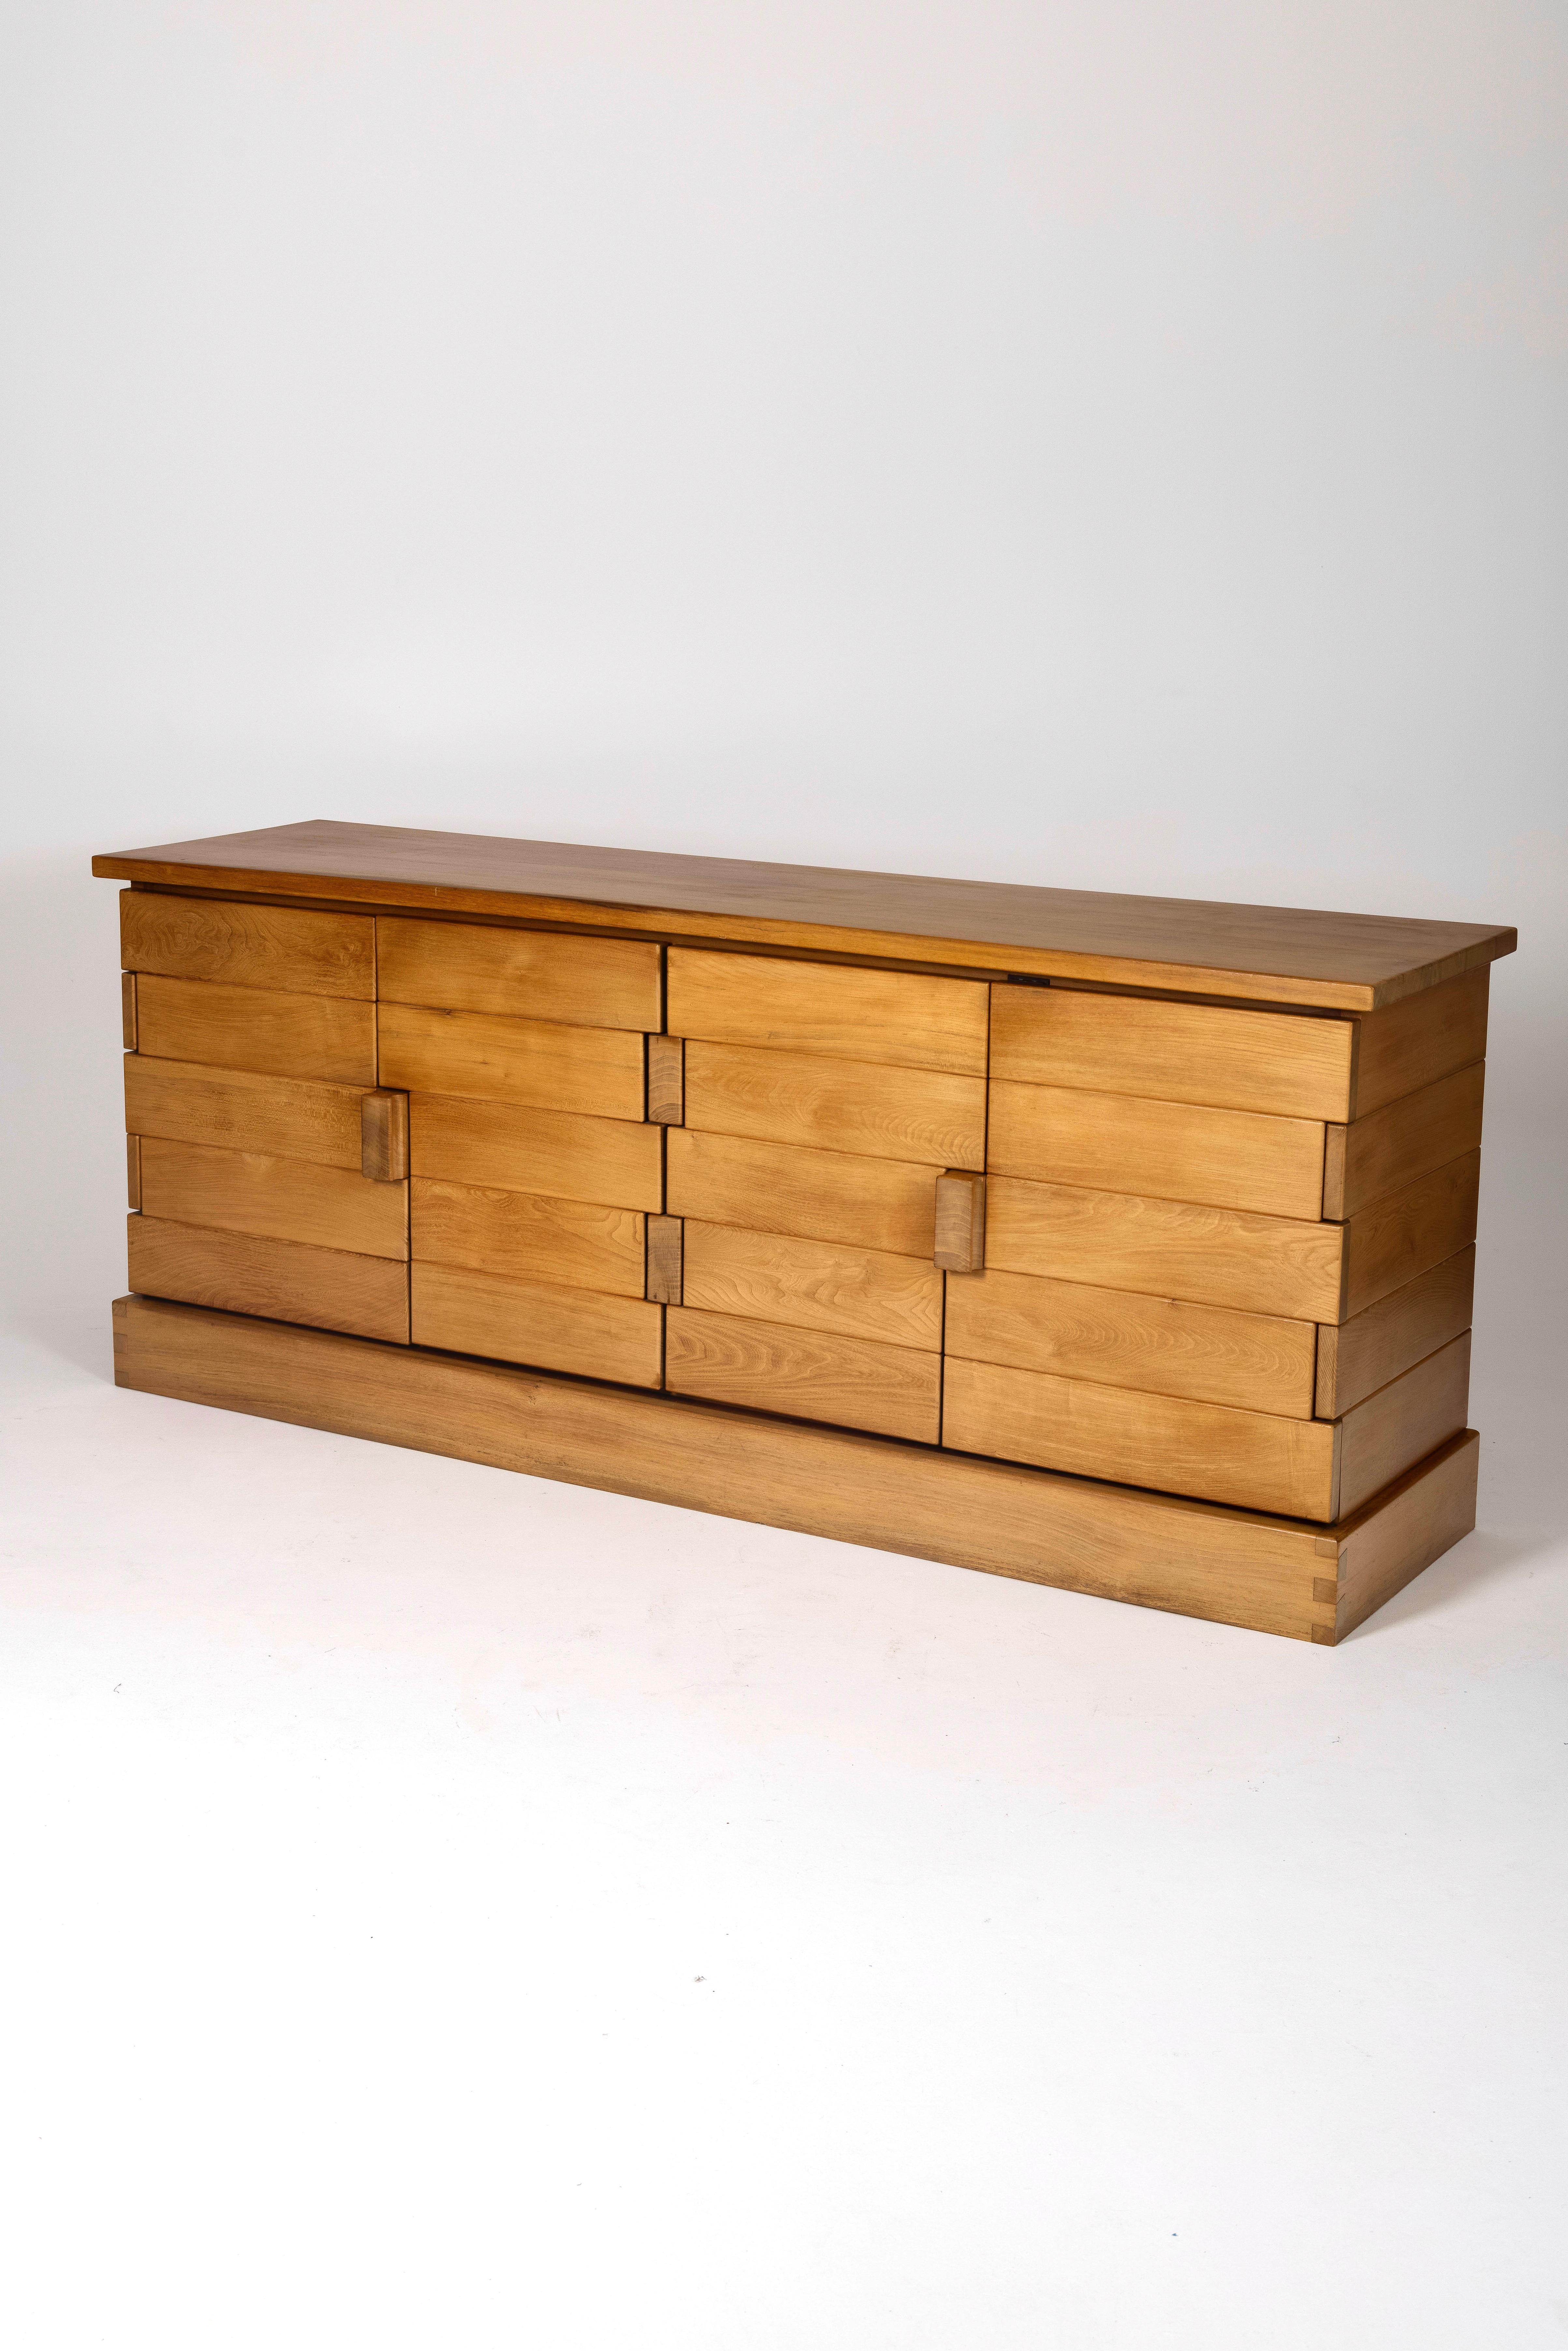 Elm sideboard from Maison Regain of the 60s. It has 3 doors with 3 boxes including 2 shelves and 3 drawers. This chest of drawers will go perfectly with the furniture of Charlotte Perriand, Christian Durupt or Pierre Chapo. 
Lp1464.